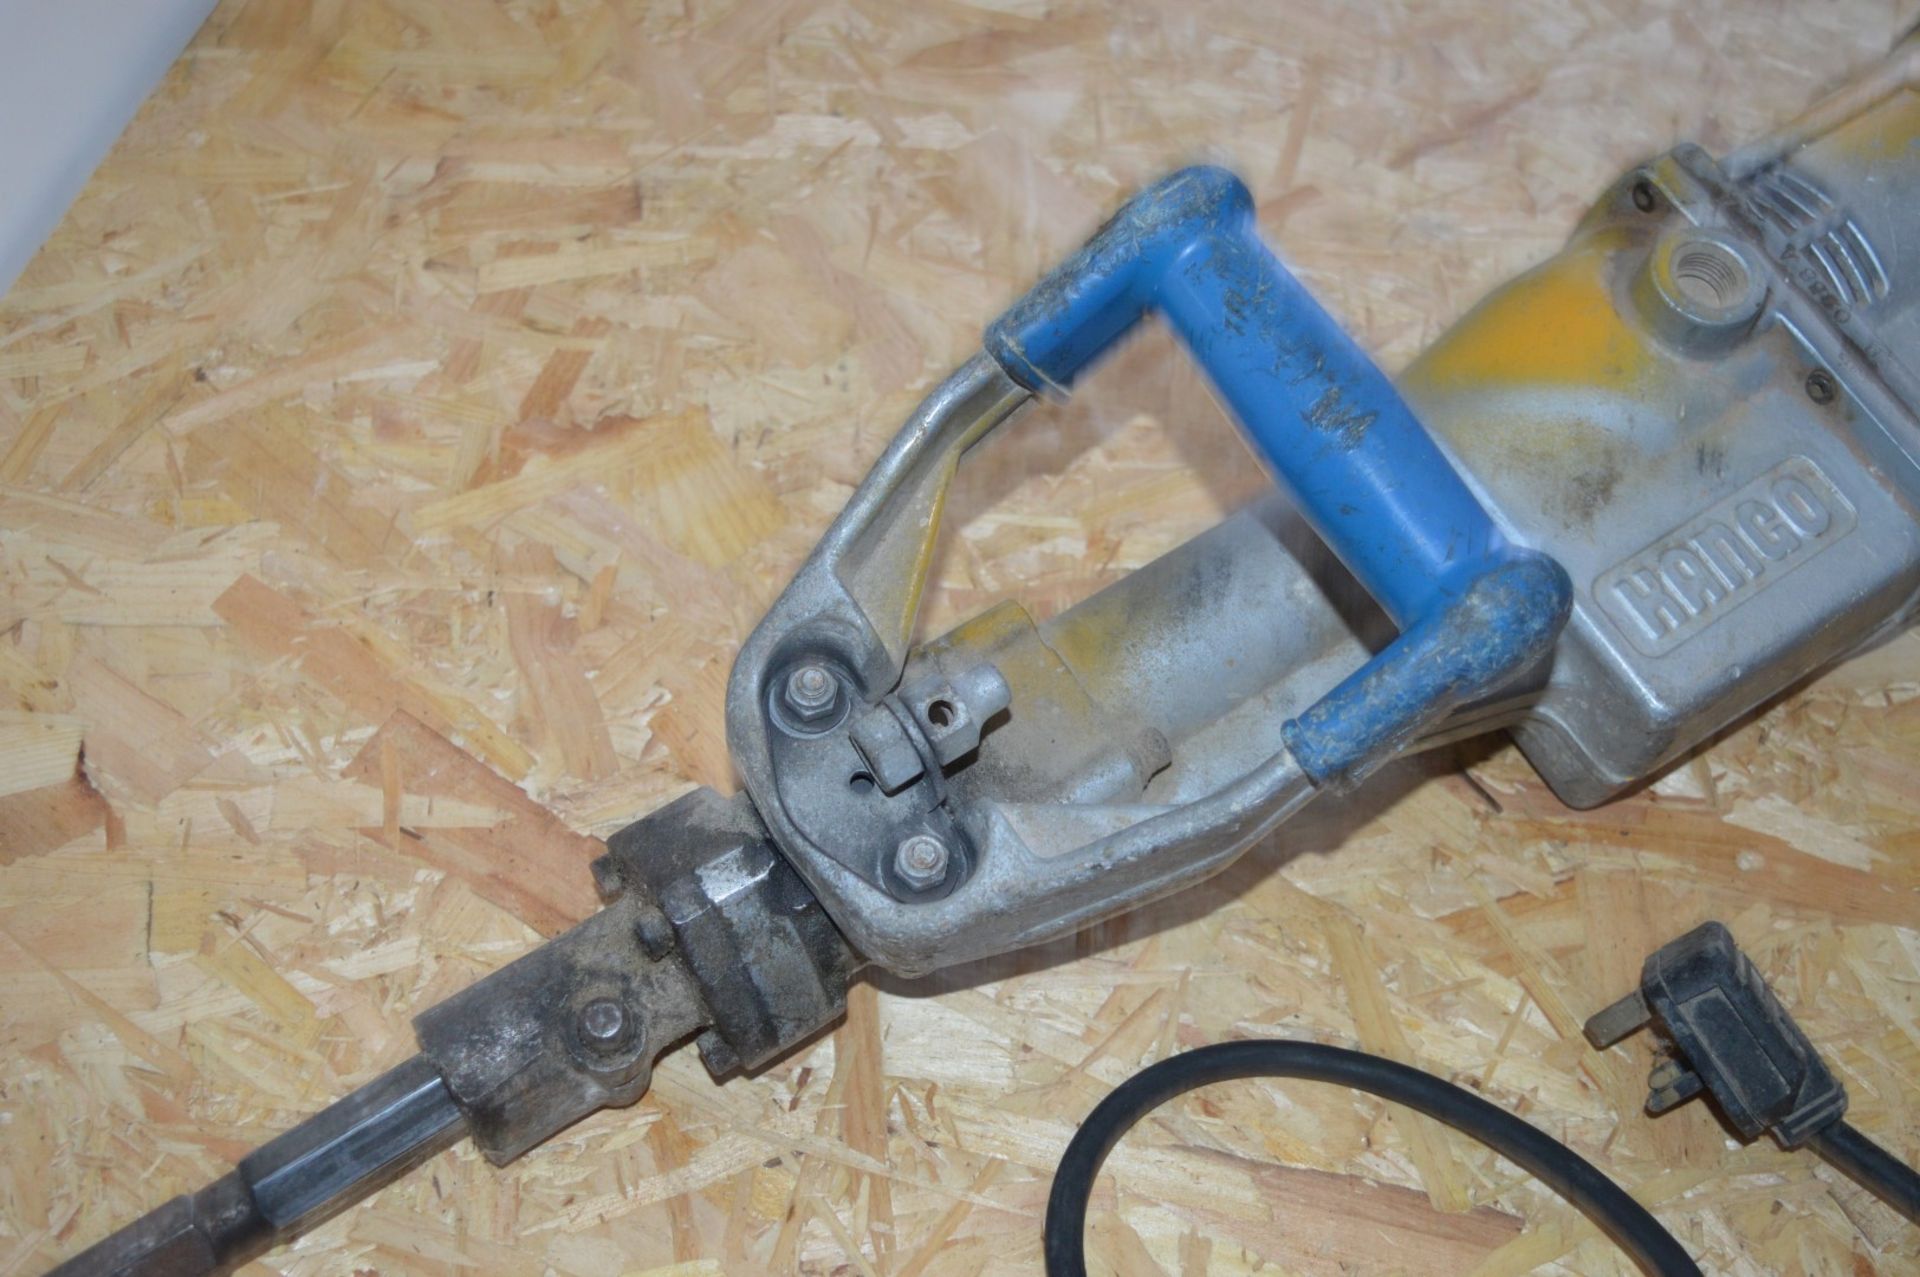 1 x Kango 950 Concrete Breaker / Hammer Drill With Two Drill Bits - 240v UK Plug - CL011 - Ref JP767 - Image 7 of 9